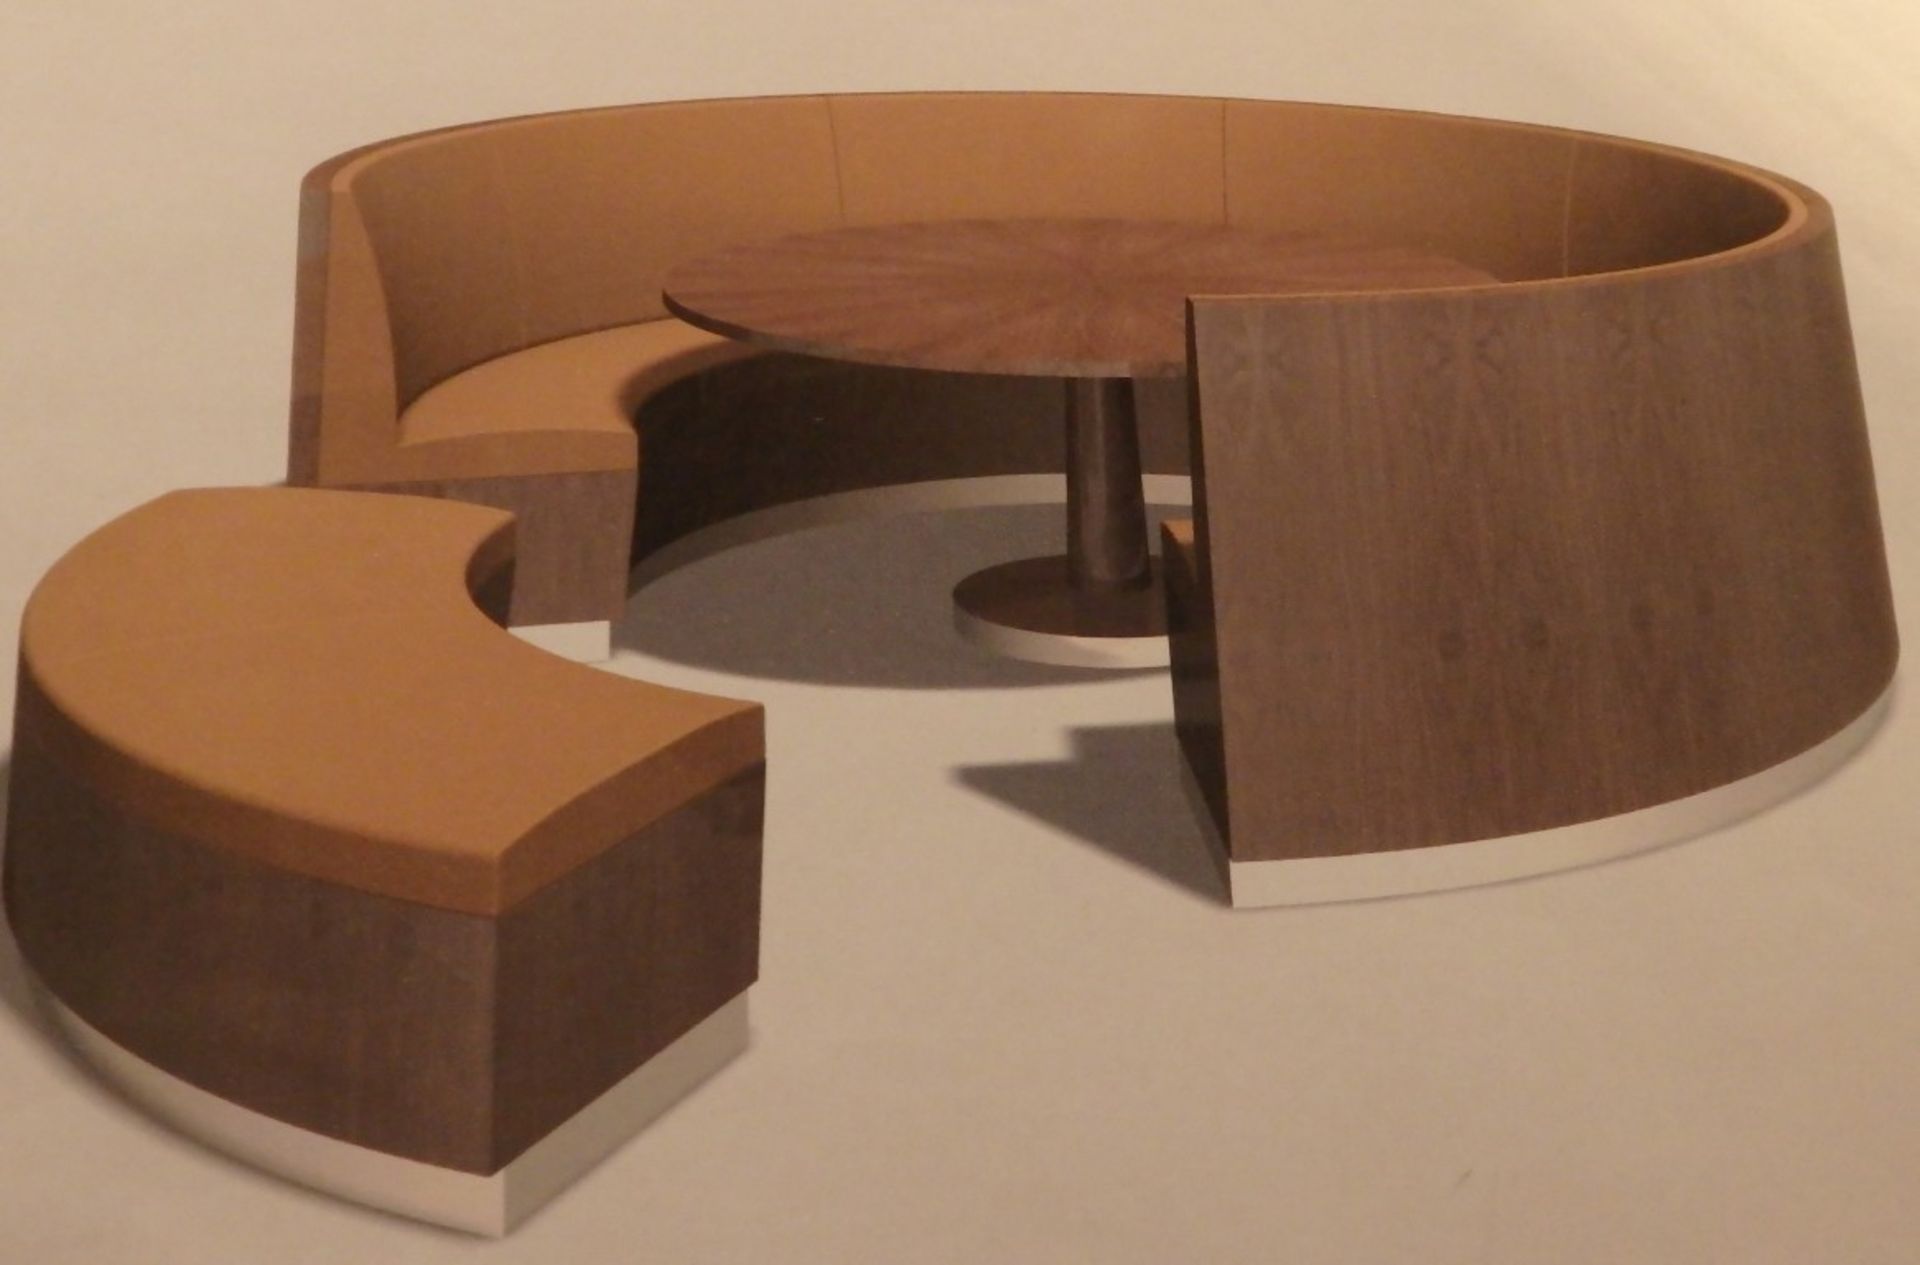 1 x Bespoke American Walnut / Genuine Leather Seating Booth - Perfect For The Modern Home or Bar - - Image 2 of 18